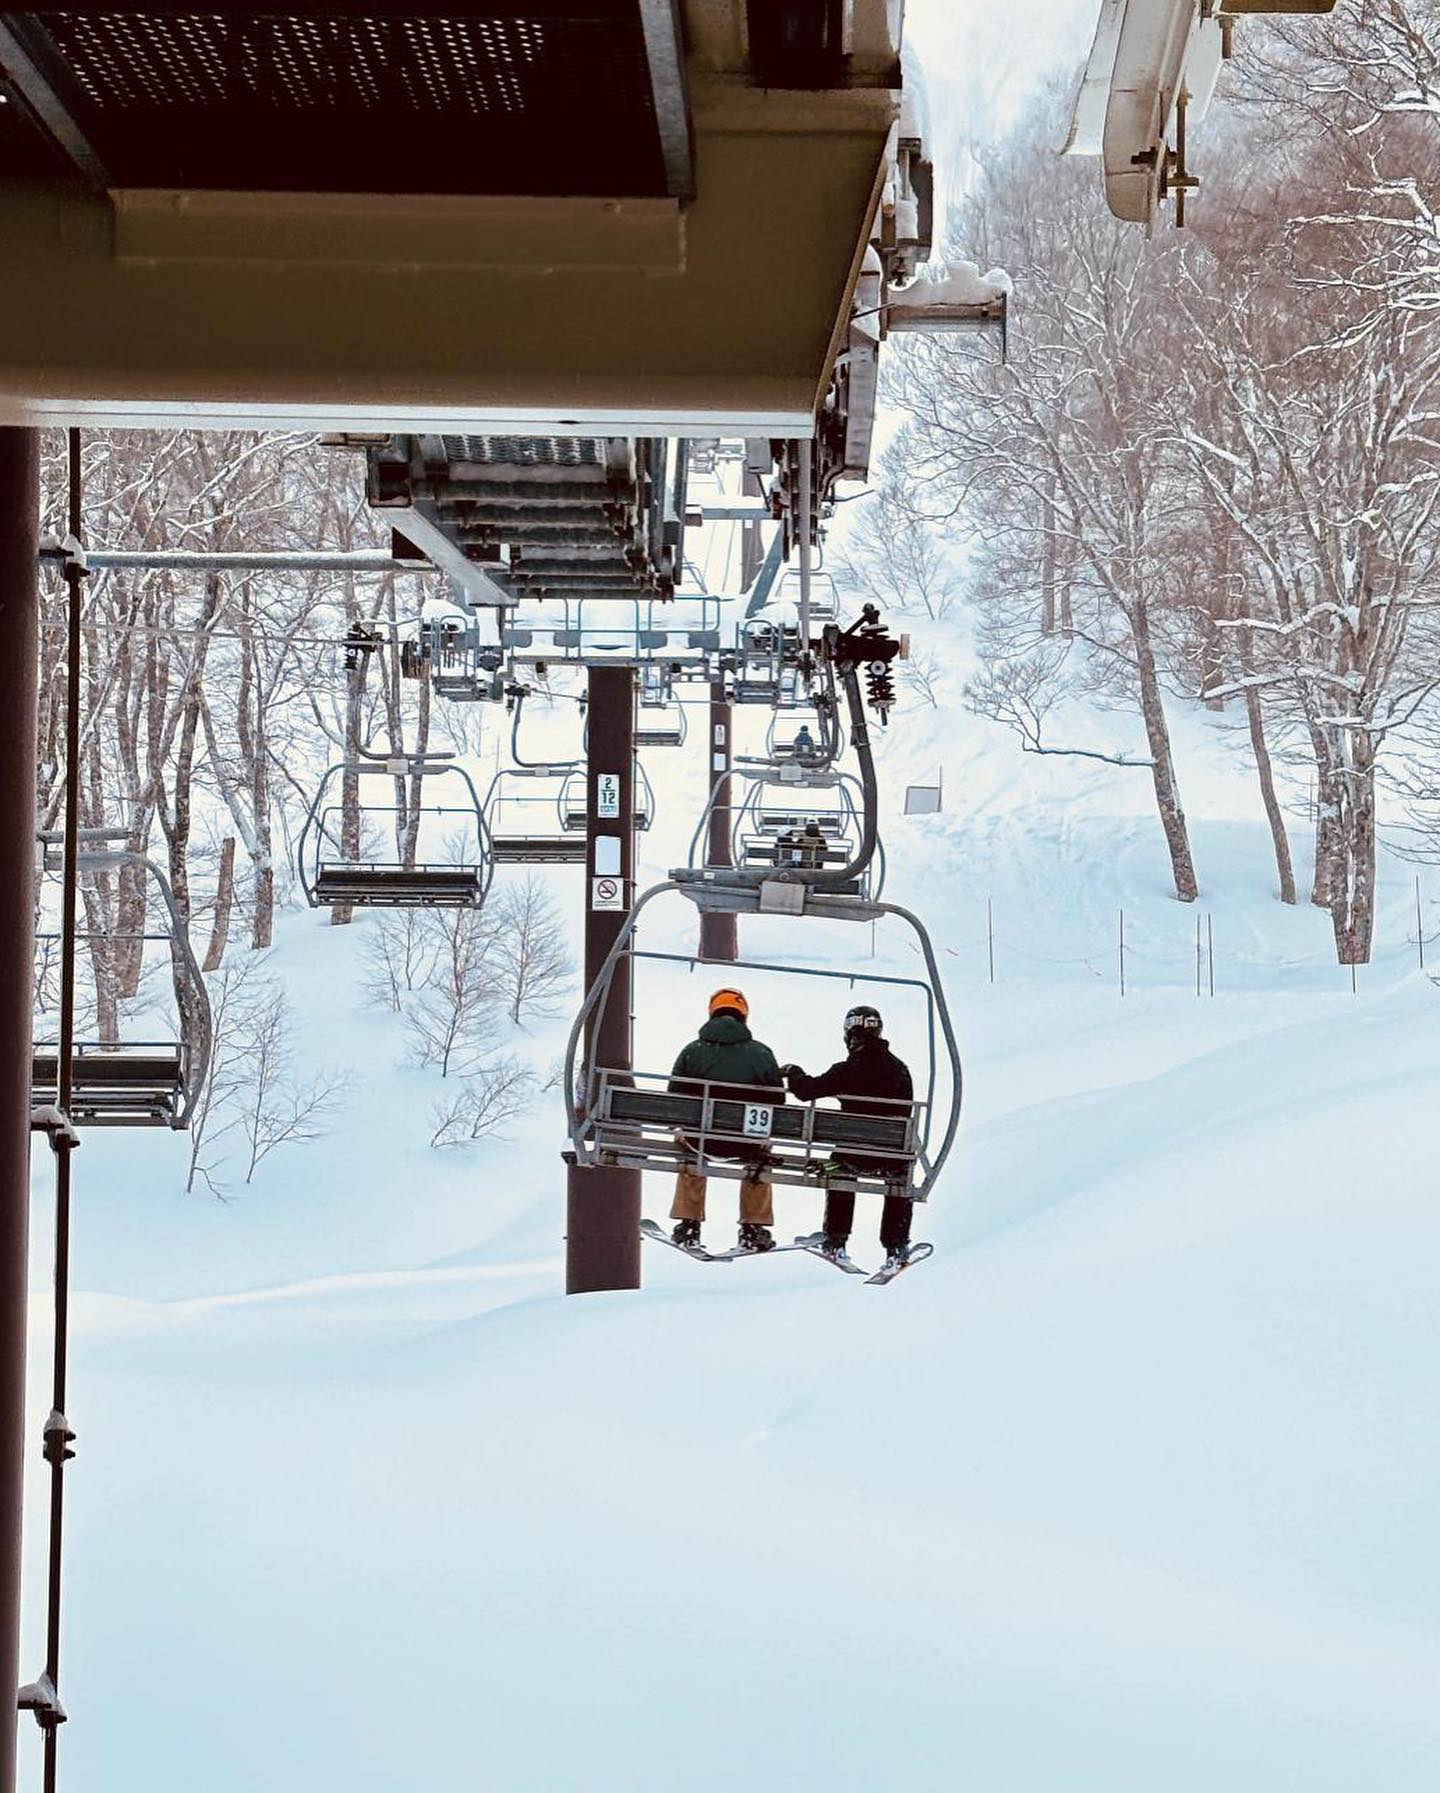 Lifts heading to the top of the mountain at Yamabiko for some fresh morning tracks